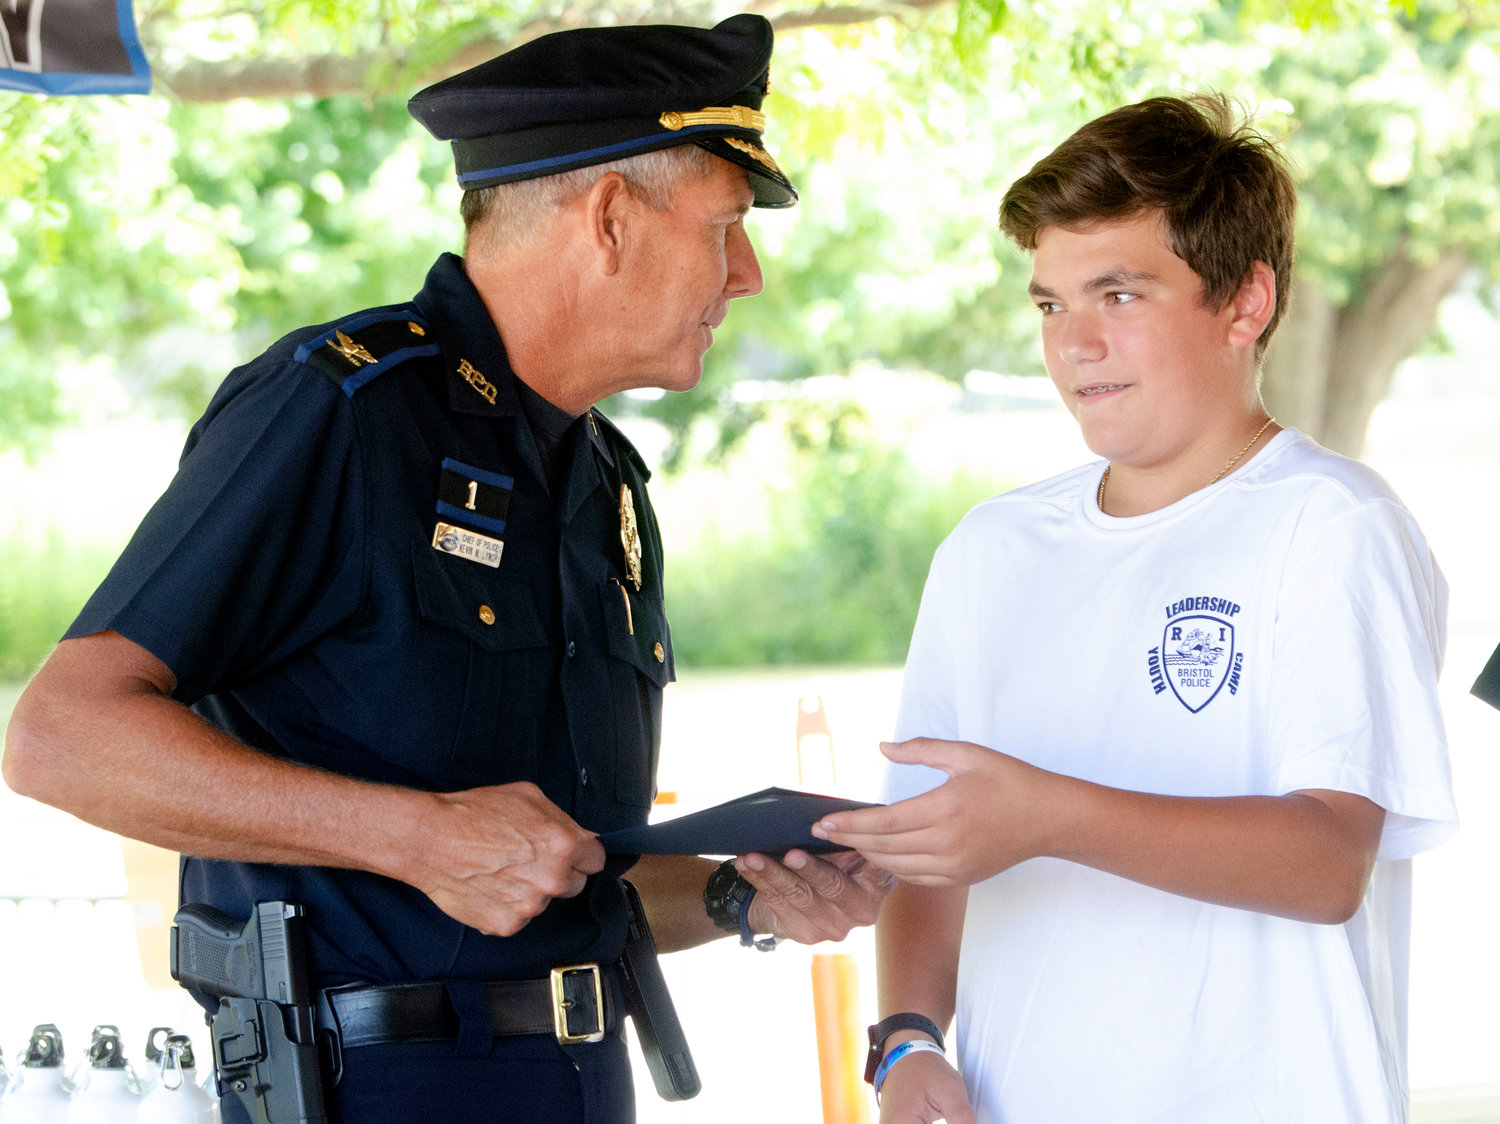 Bristol Police Chief Kevin Lynch poses with Domenic Baldinelli after she received a certificate of appreciation during the Bristol Police Youth Leadership Academy at the town beach on Friday.